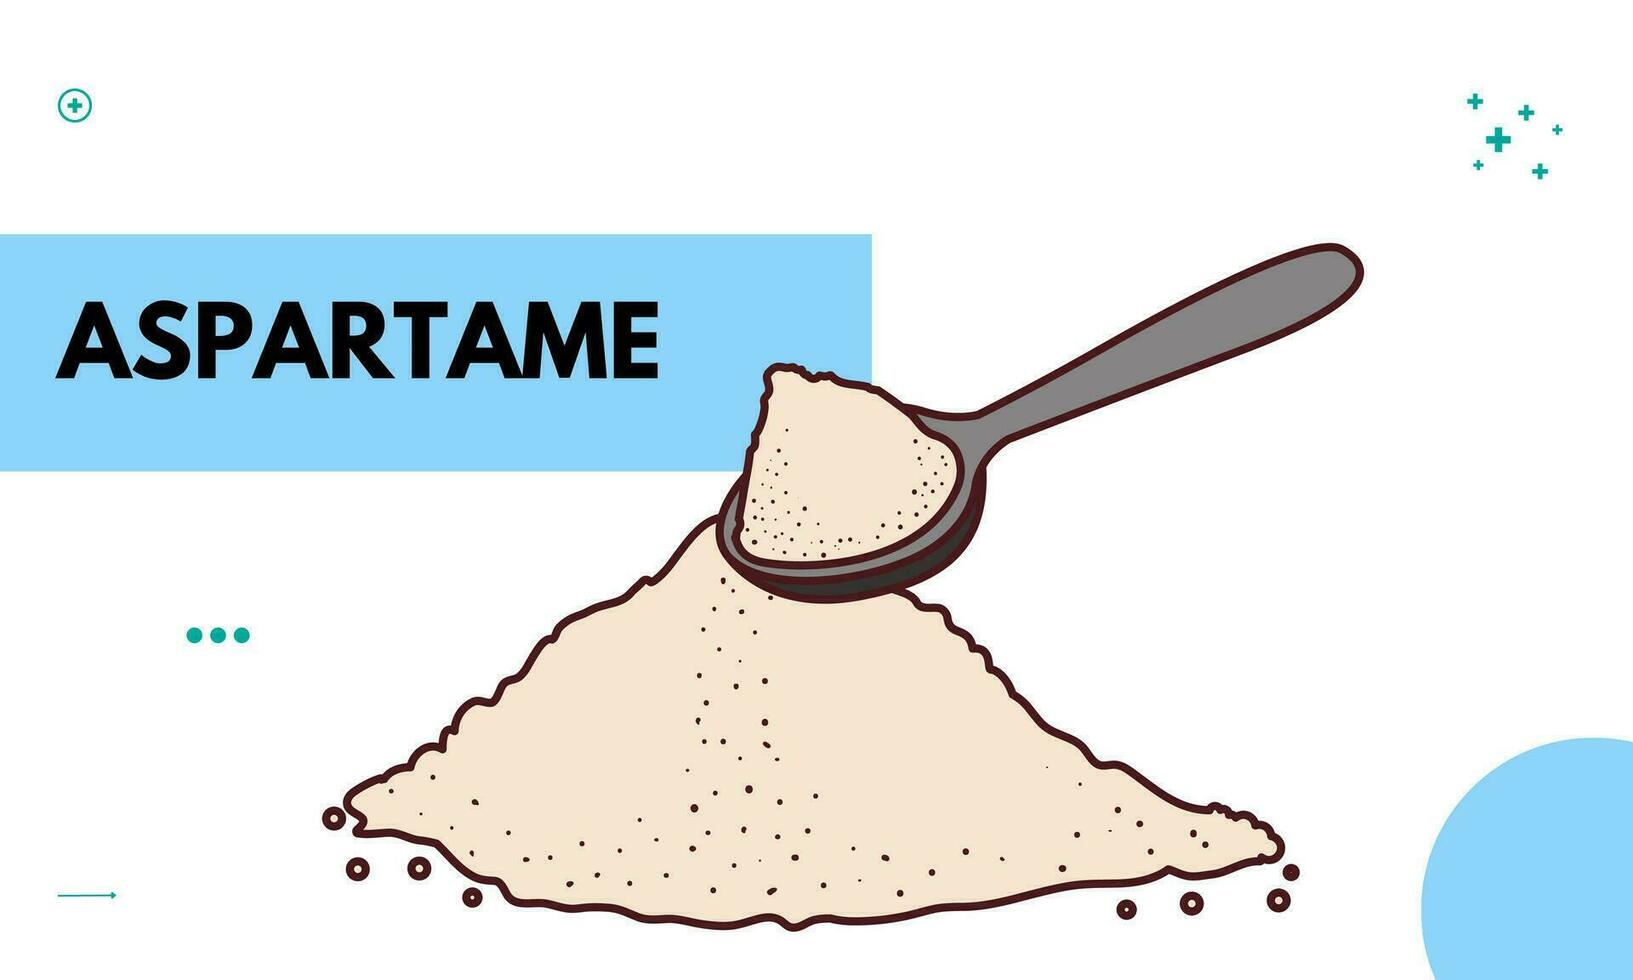 Aspartame is a low-calorie artificial sweetener that is approximately 100 times sweeter than sugar. Sweetener products vector